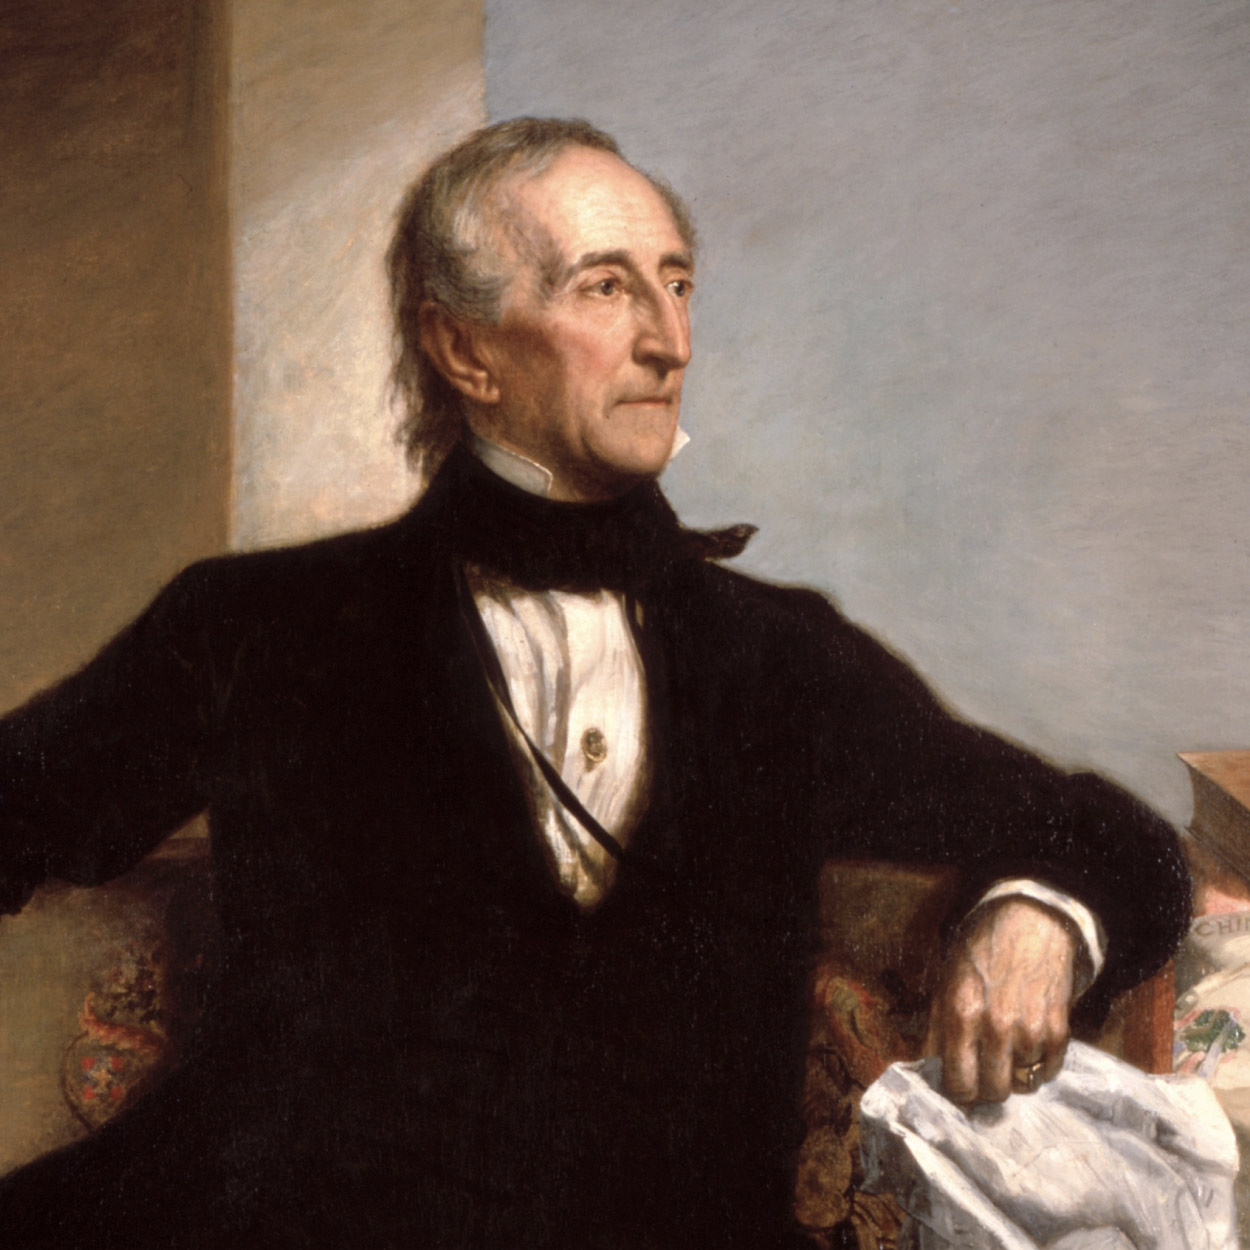 Portrait of John Tyler, the 10th President of the United States